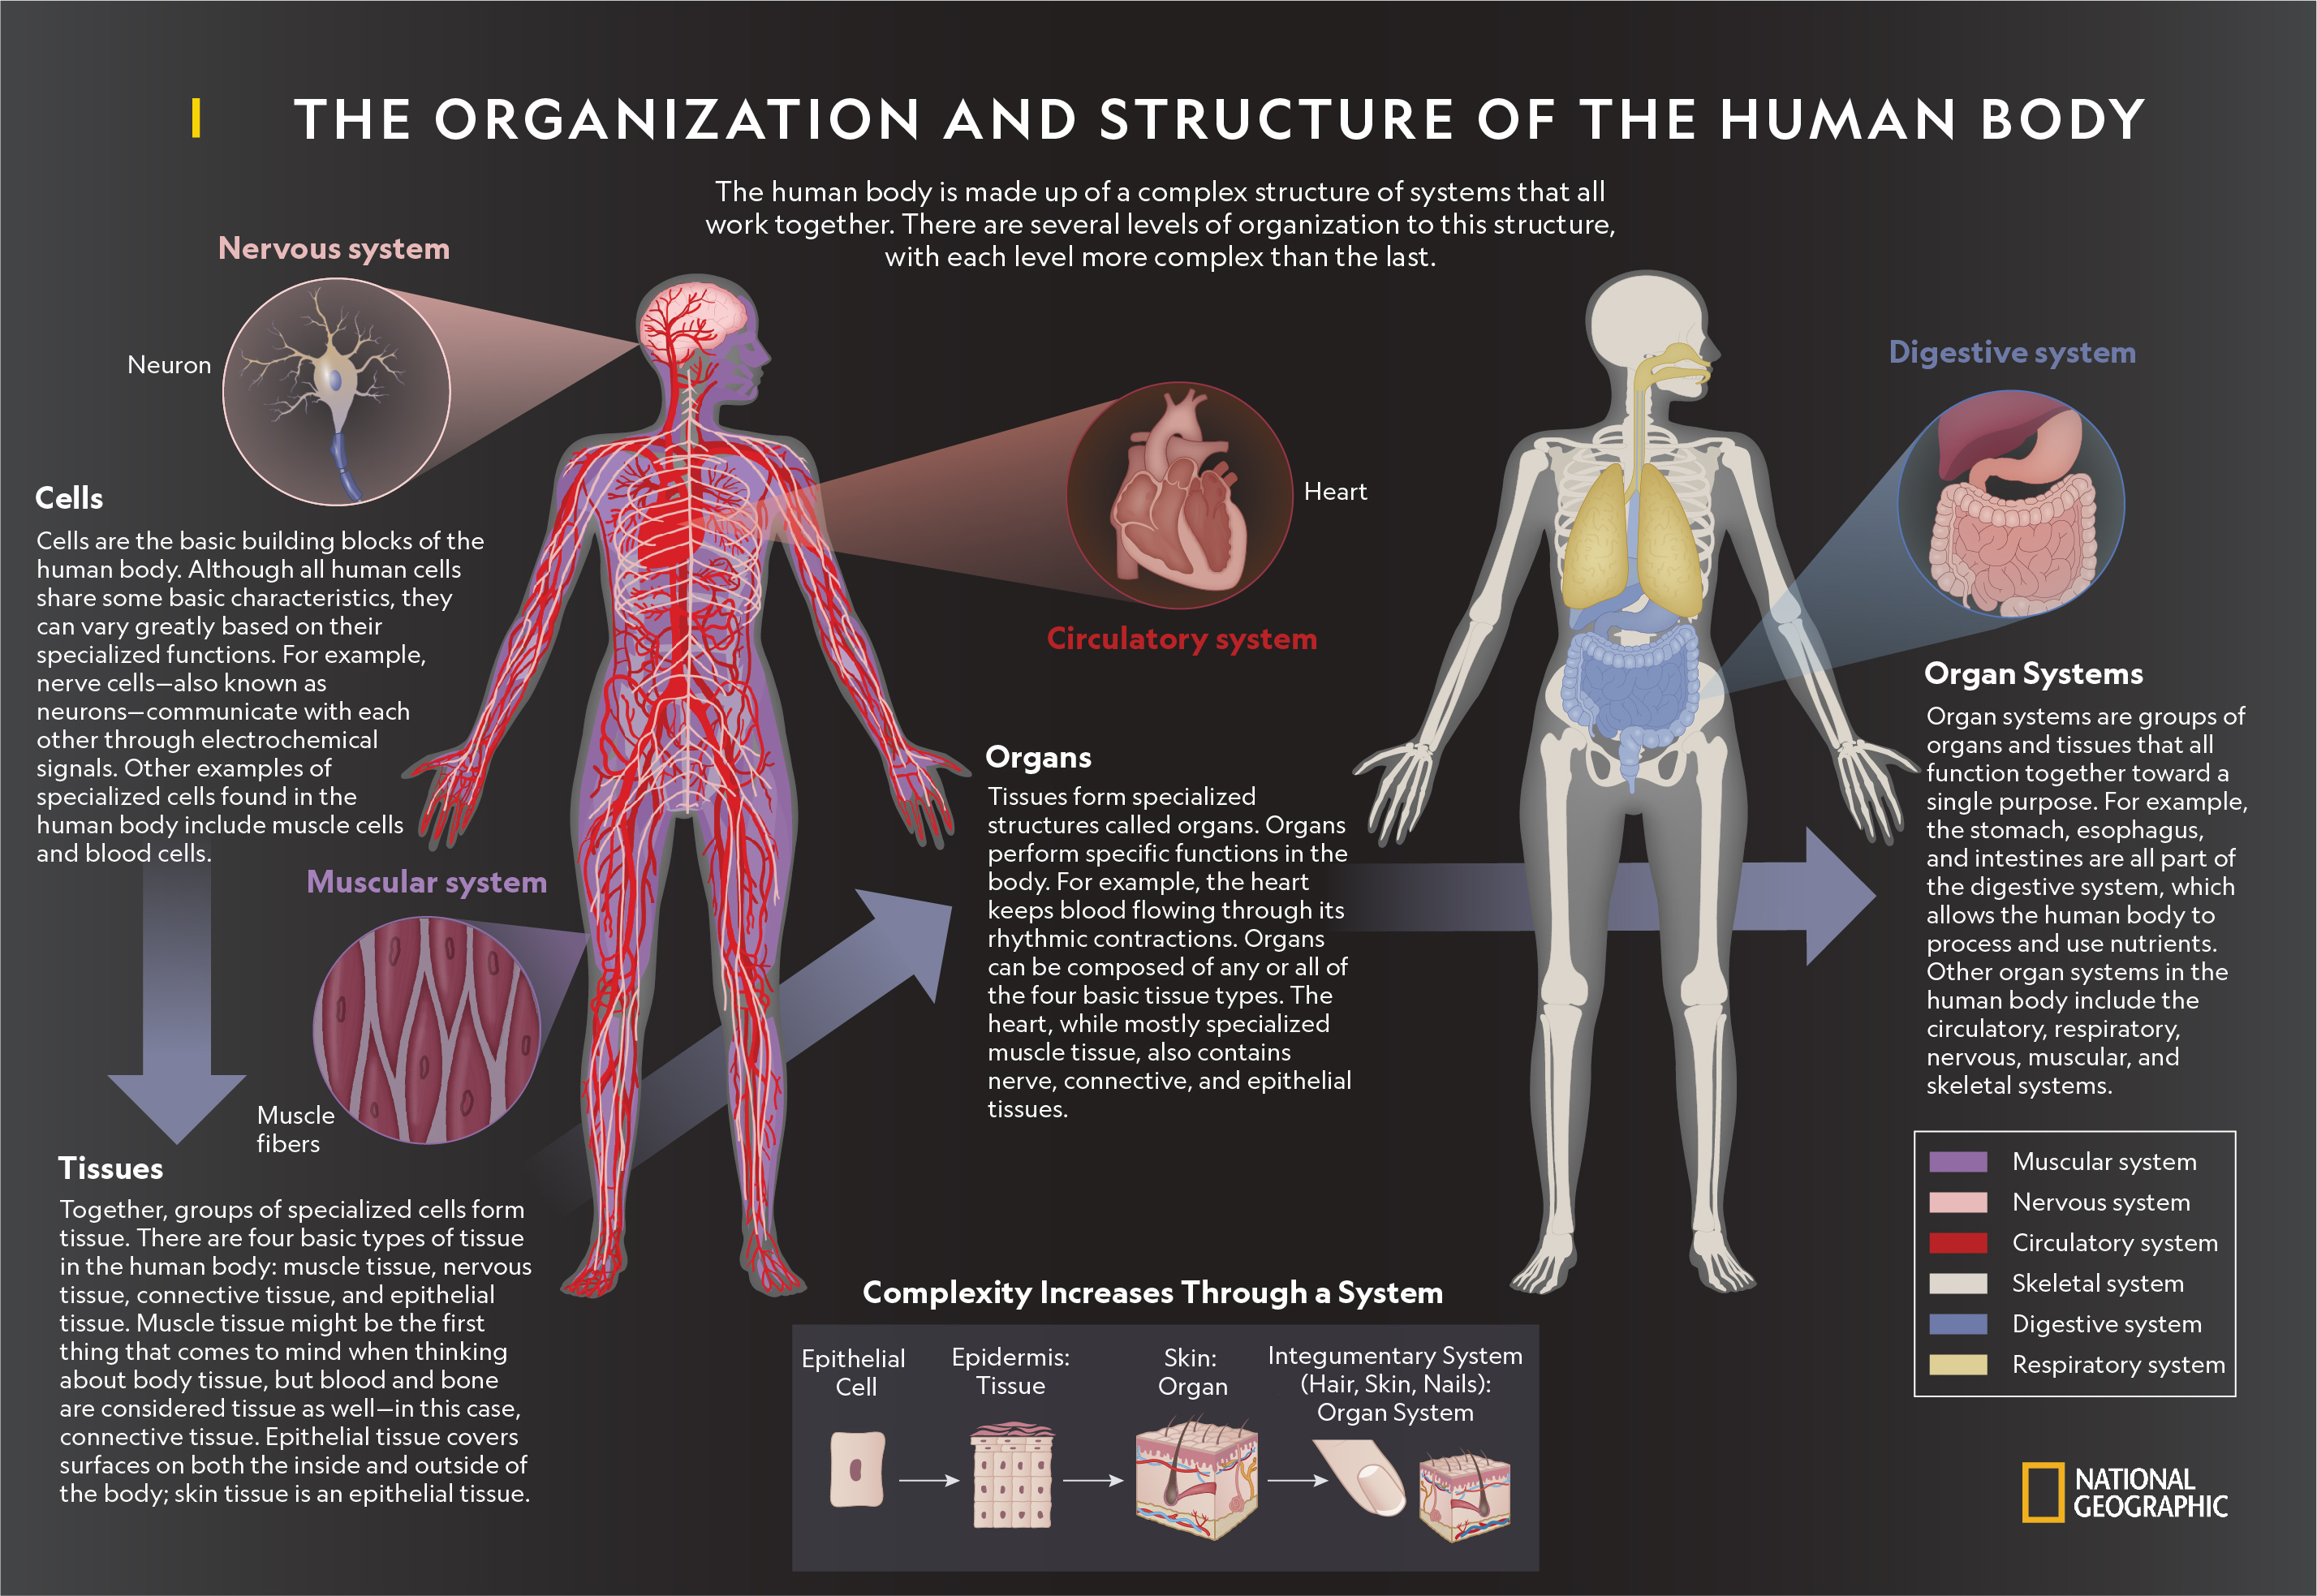 Human body systems: Overview, anatomy, functions